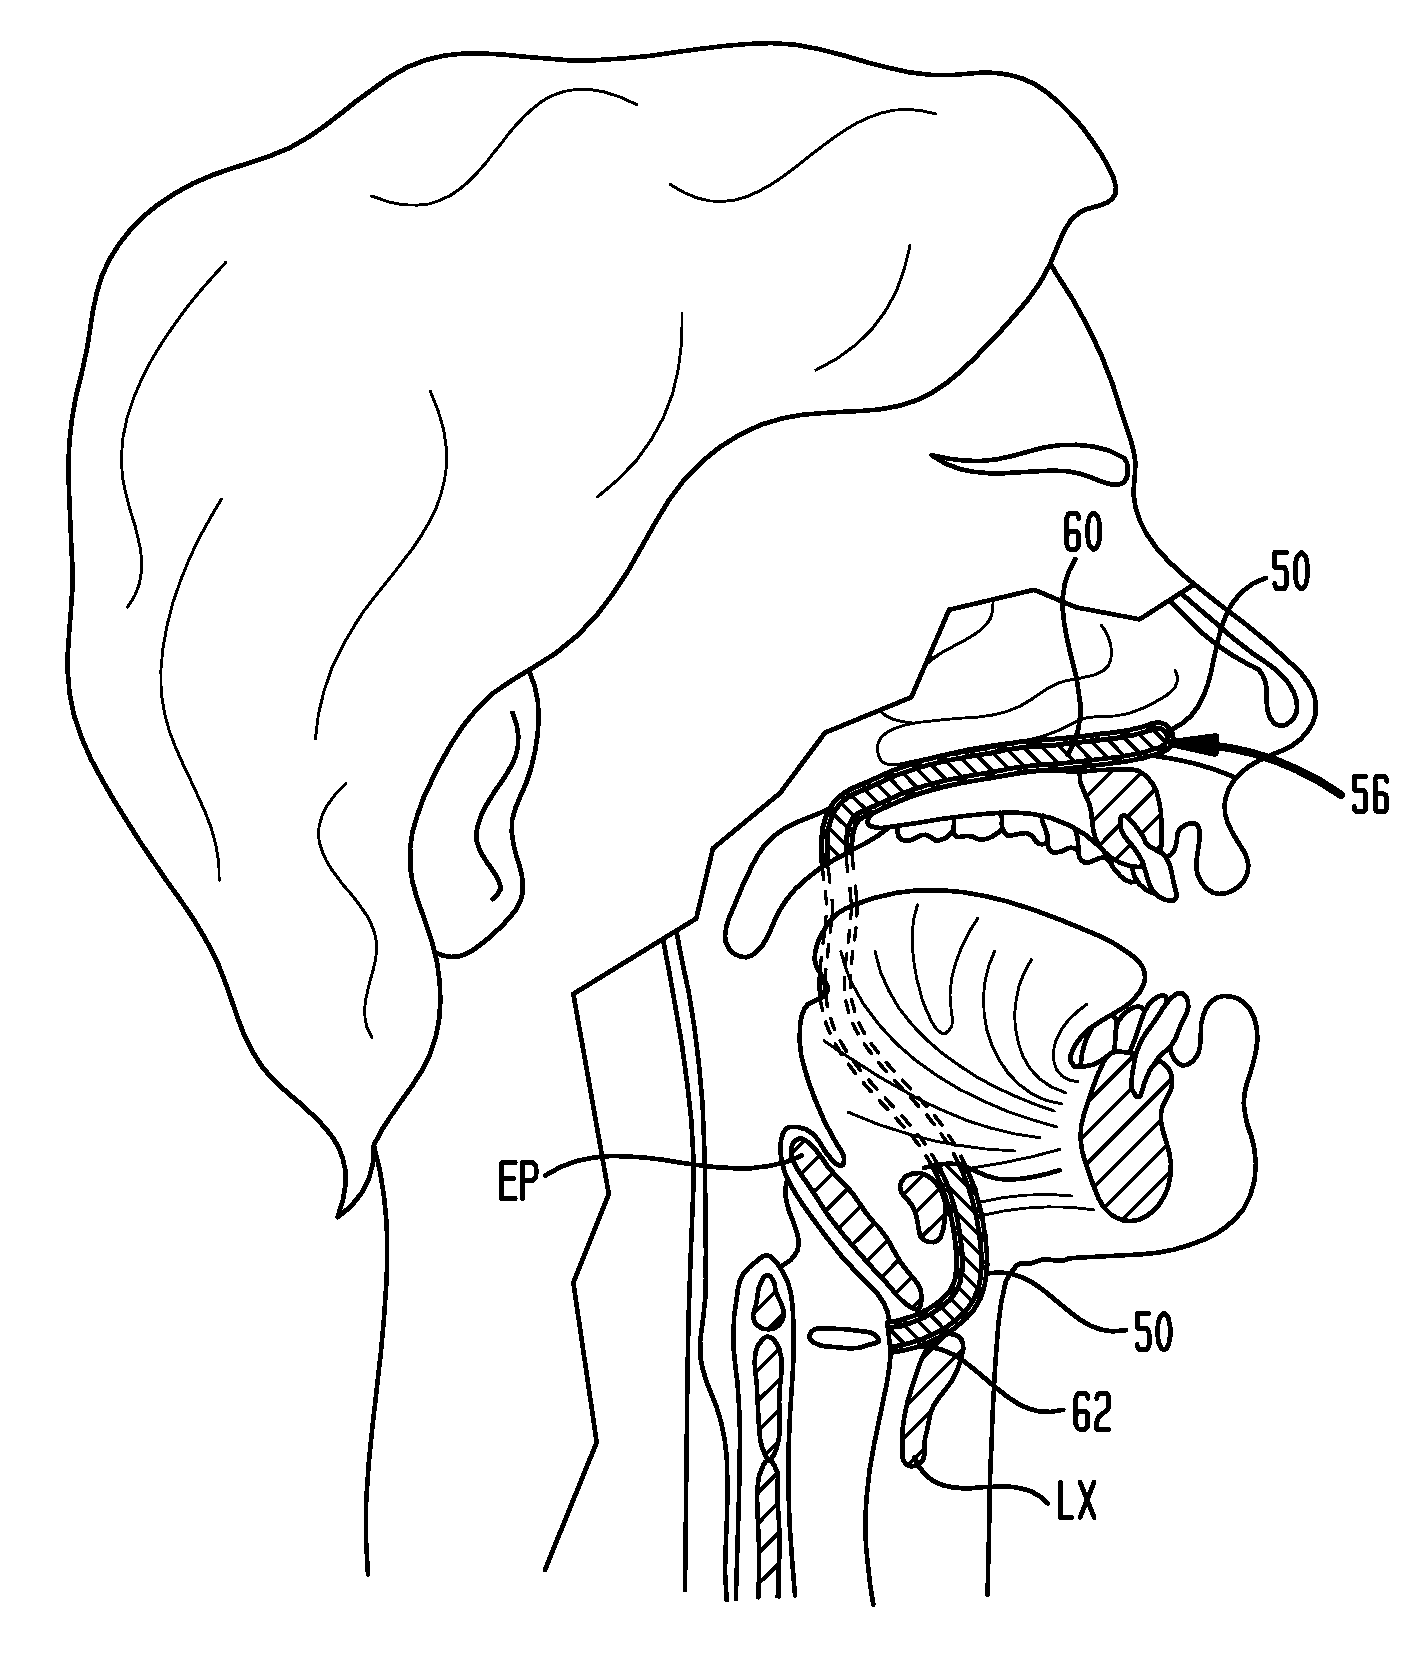 Methods and devices for forming an auxiliary airway for treating obstructive sleep apnea